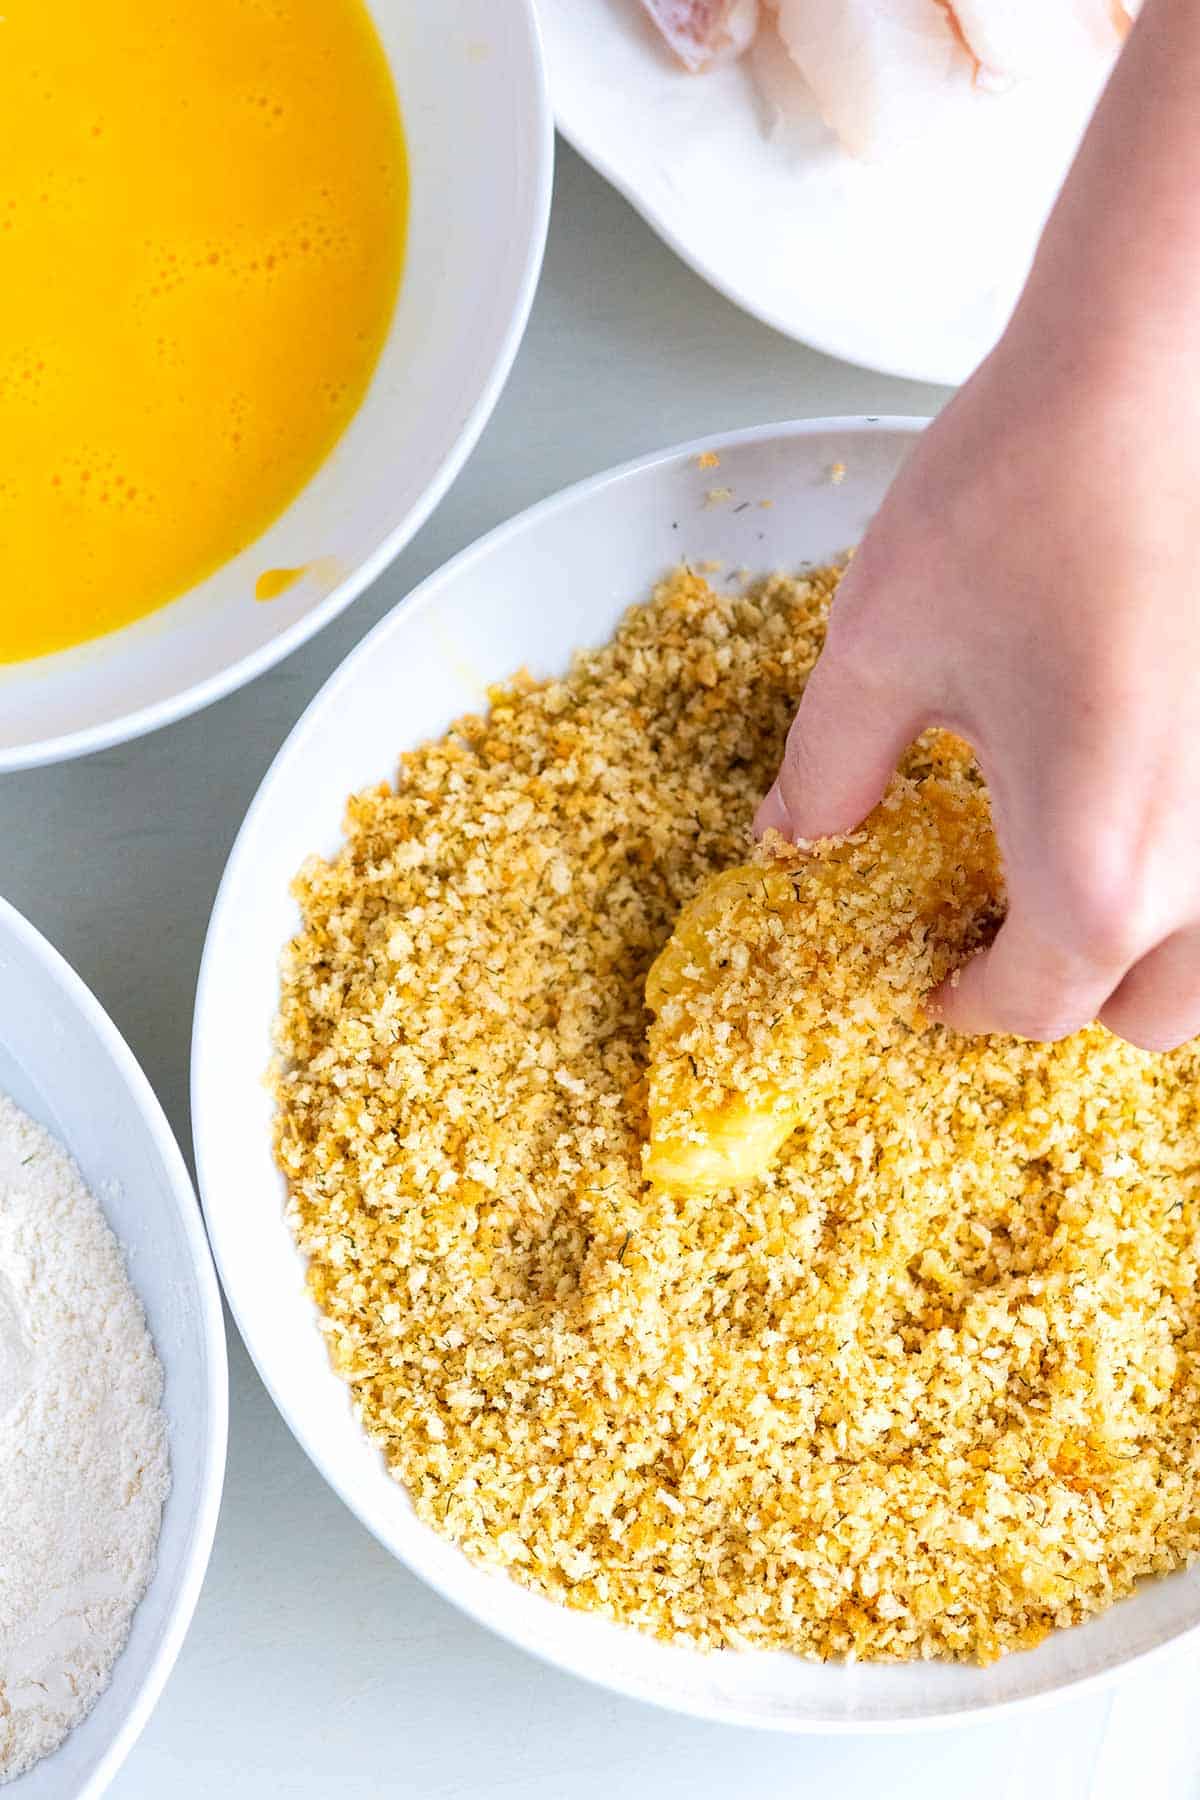 Breading fish sticks with flour, egg and breadcrumbs